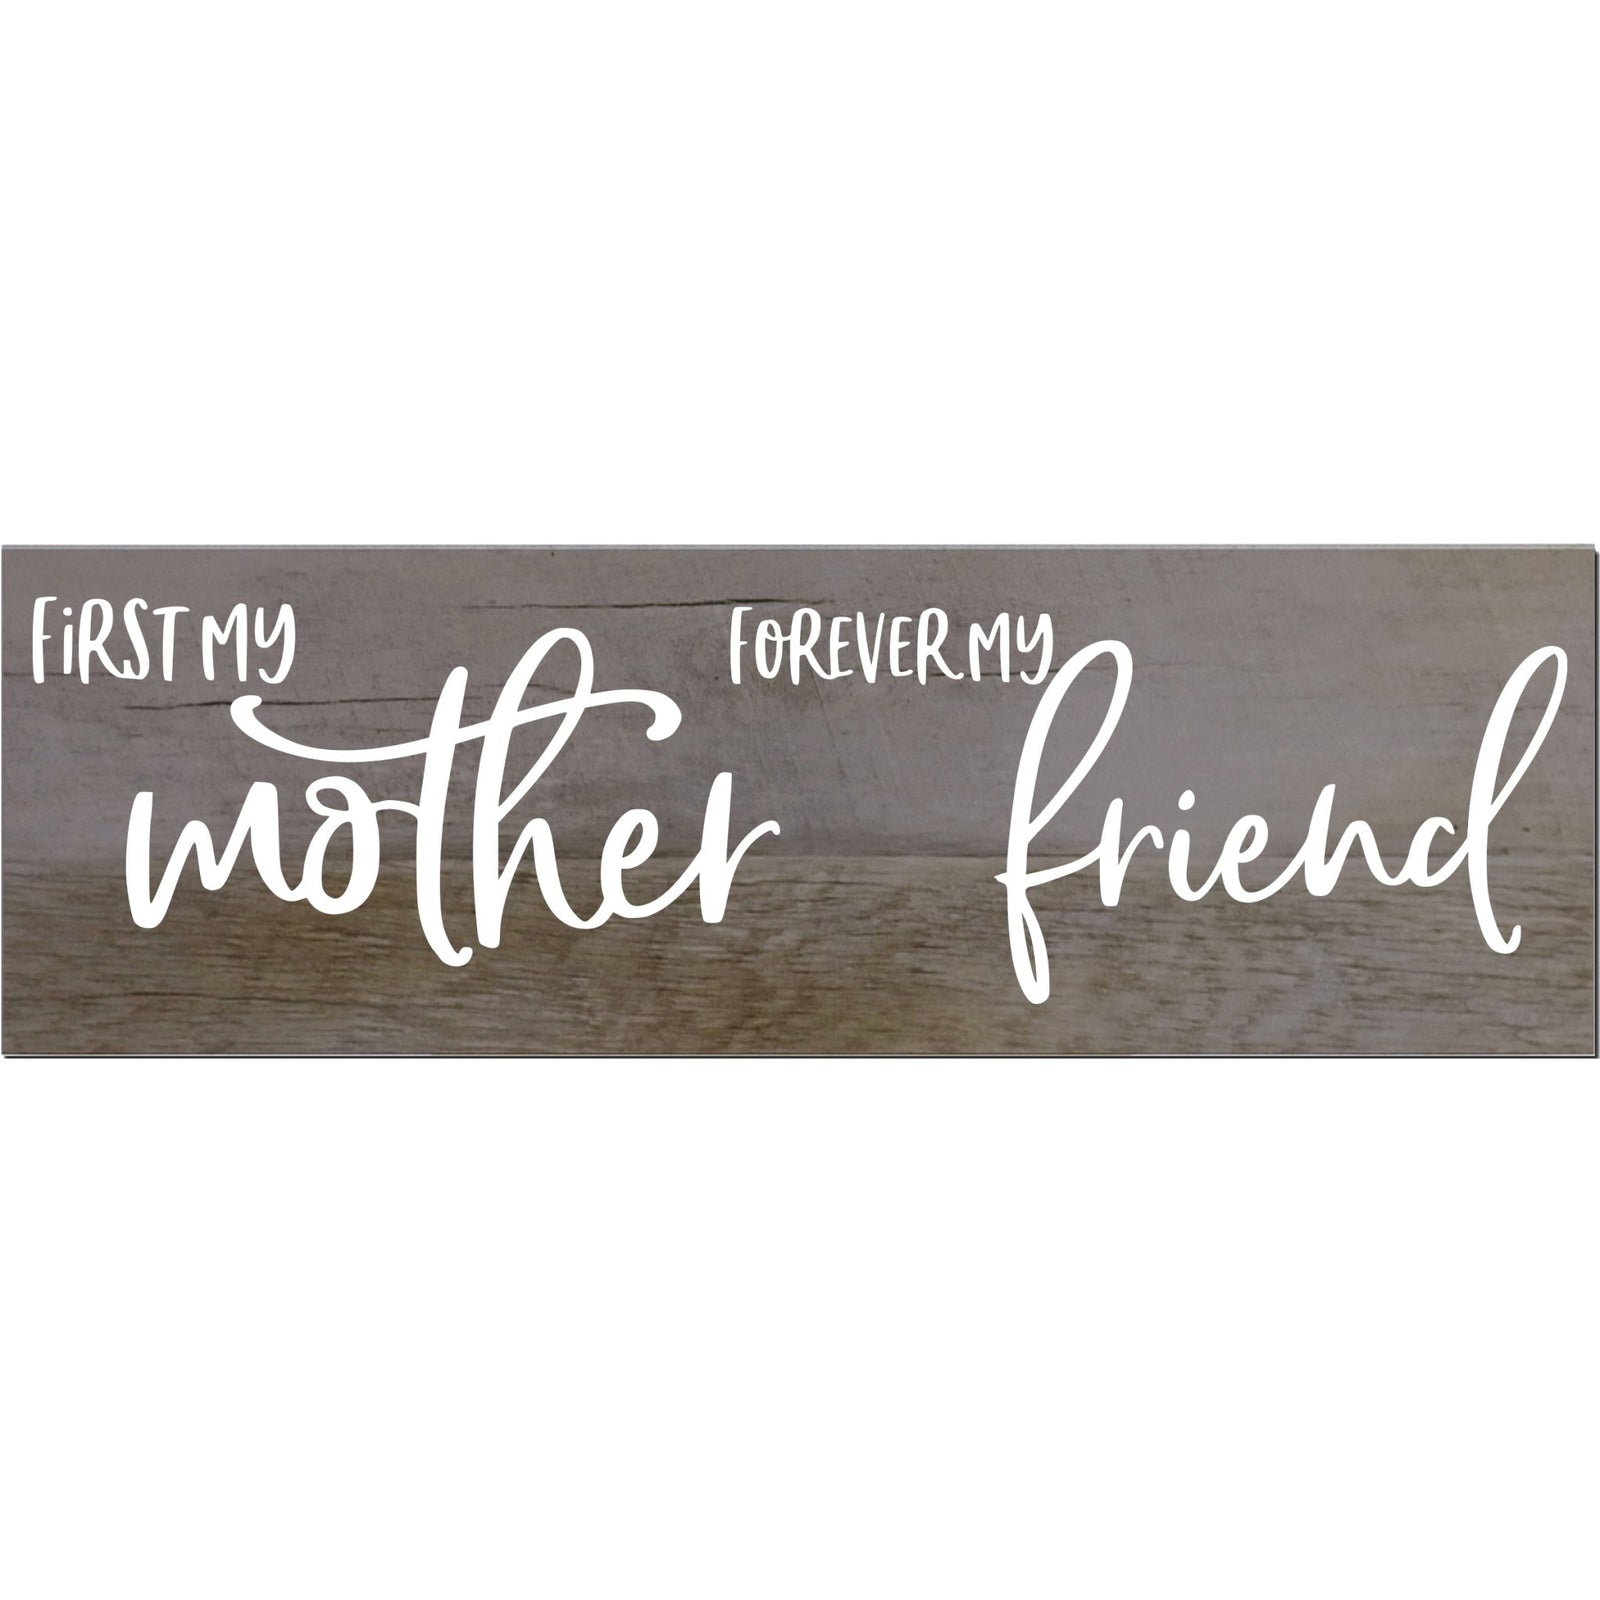 Modern Inspirational Wooden Wall Art Hanging Plaque 22.5x6 - First My Mother Forever My Friend - for Family and Home Decorations - LifeSong Milestones